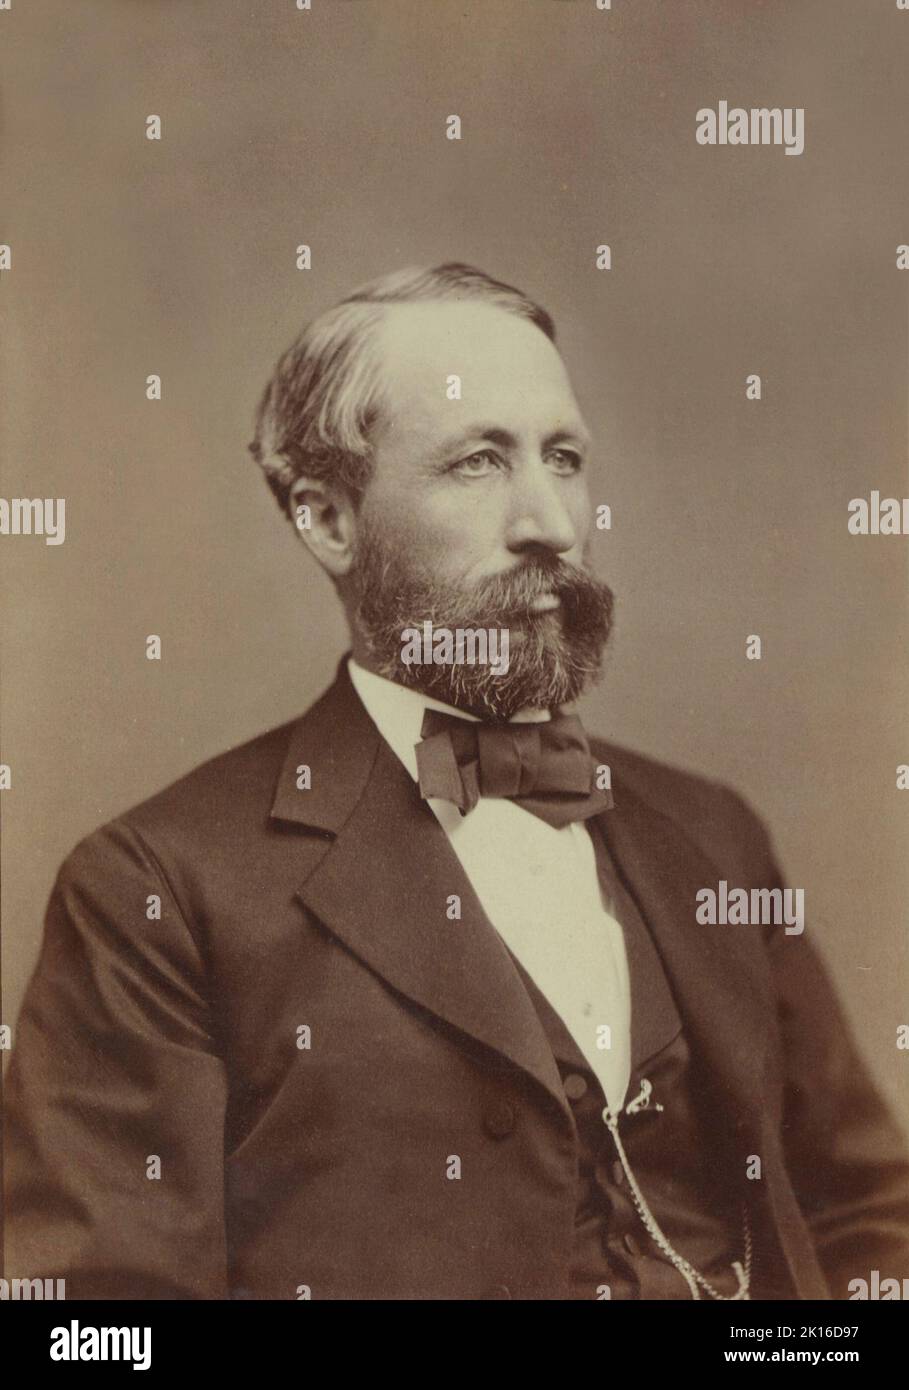 Portrait of William Smith Clark (1826 – 1886), American professor of chemistry, botany and zoology, a colonel during the American Civil War, and a leader in agricultural education. Stock Photo